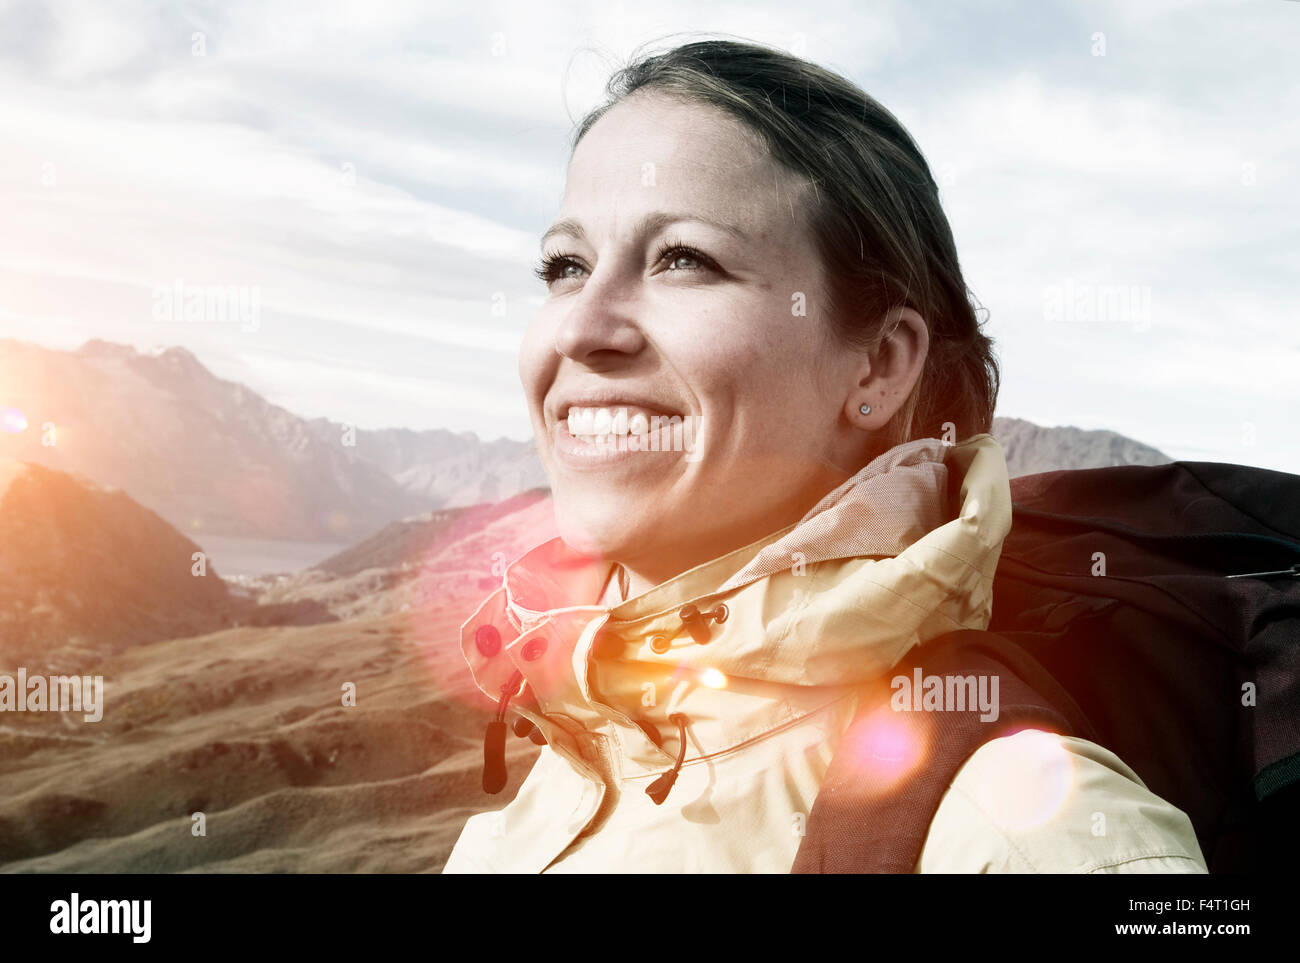 Woman Hiking Mountains New Zealand Concept Stock Photo